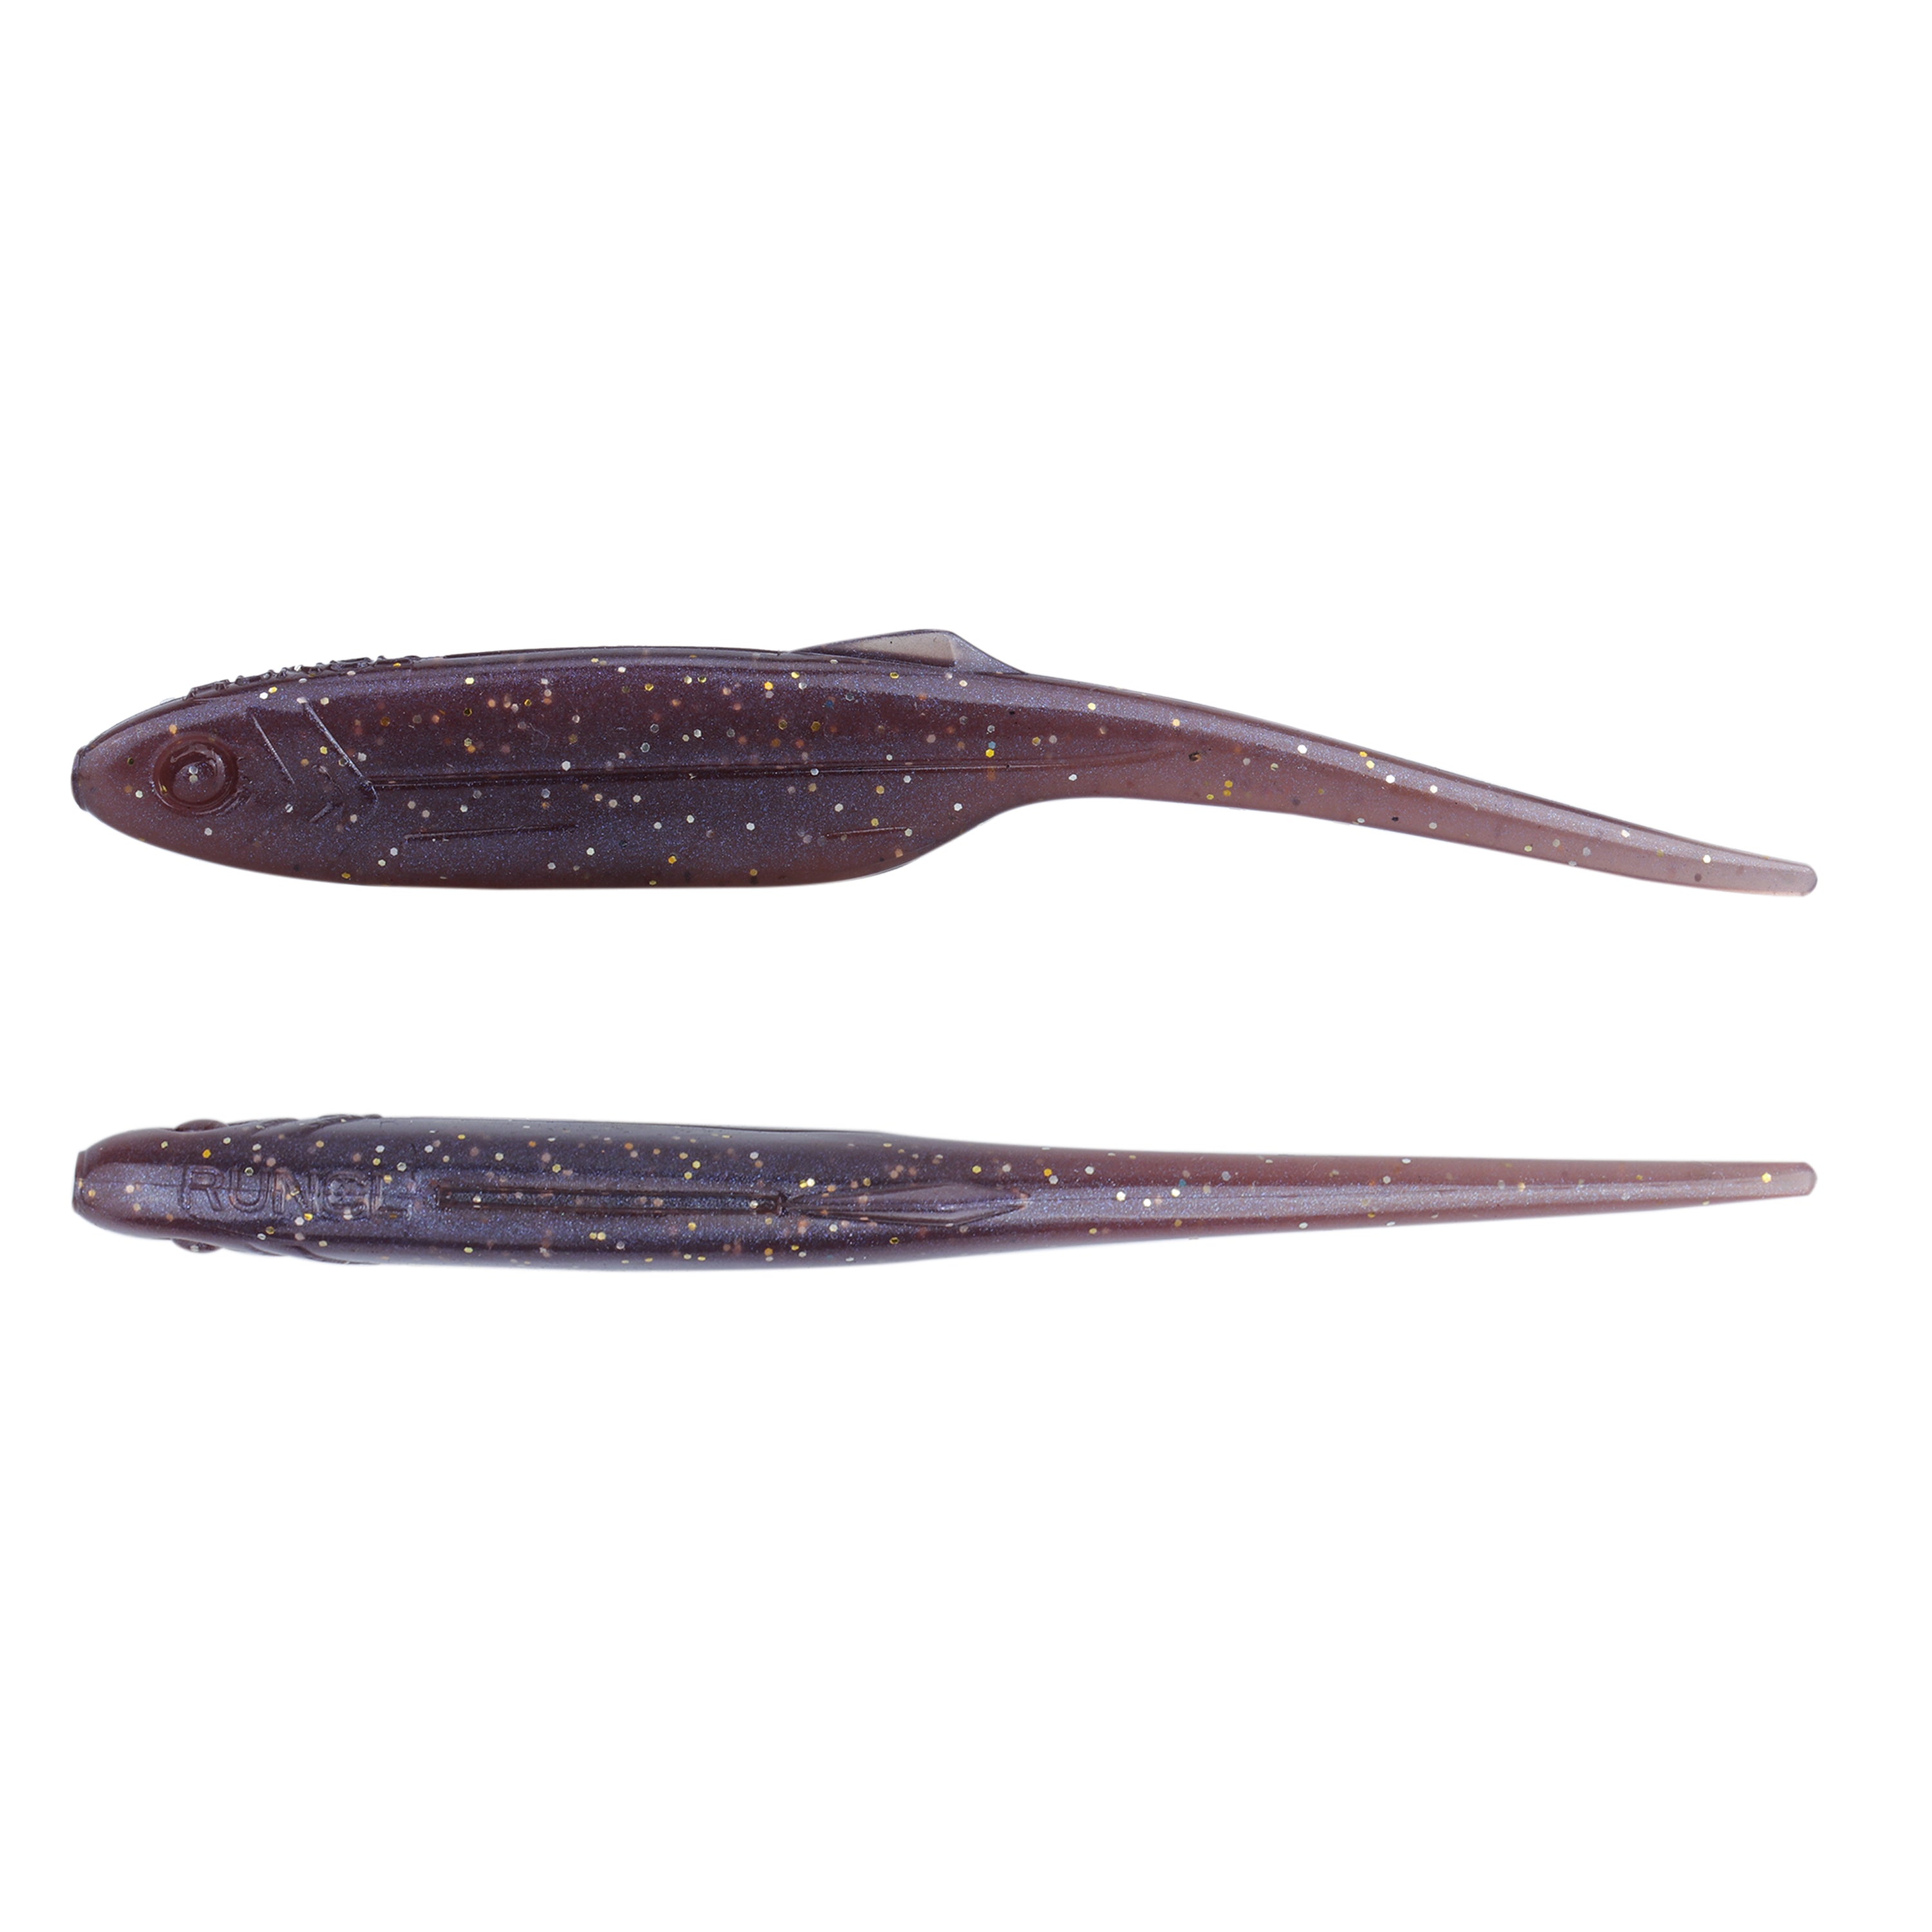 RUNCL kinds of baits【Free shipping on over 10 packs】